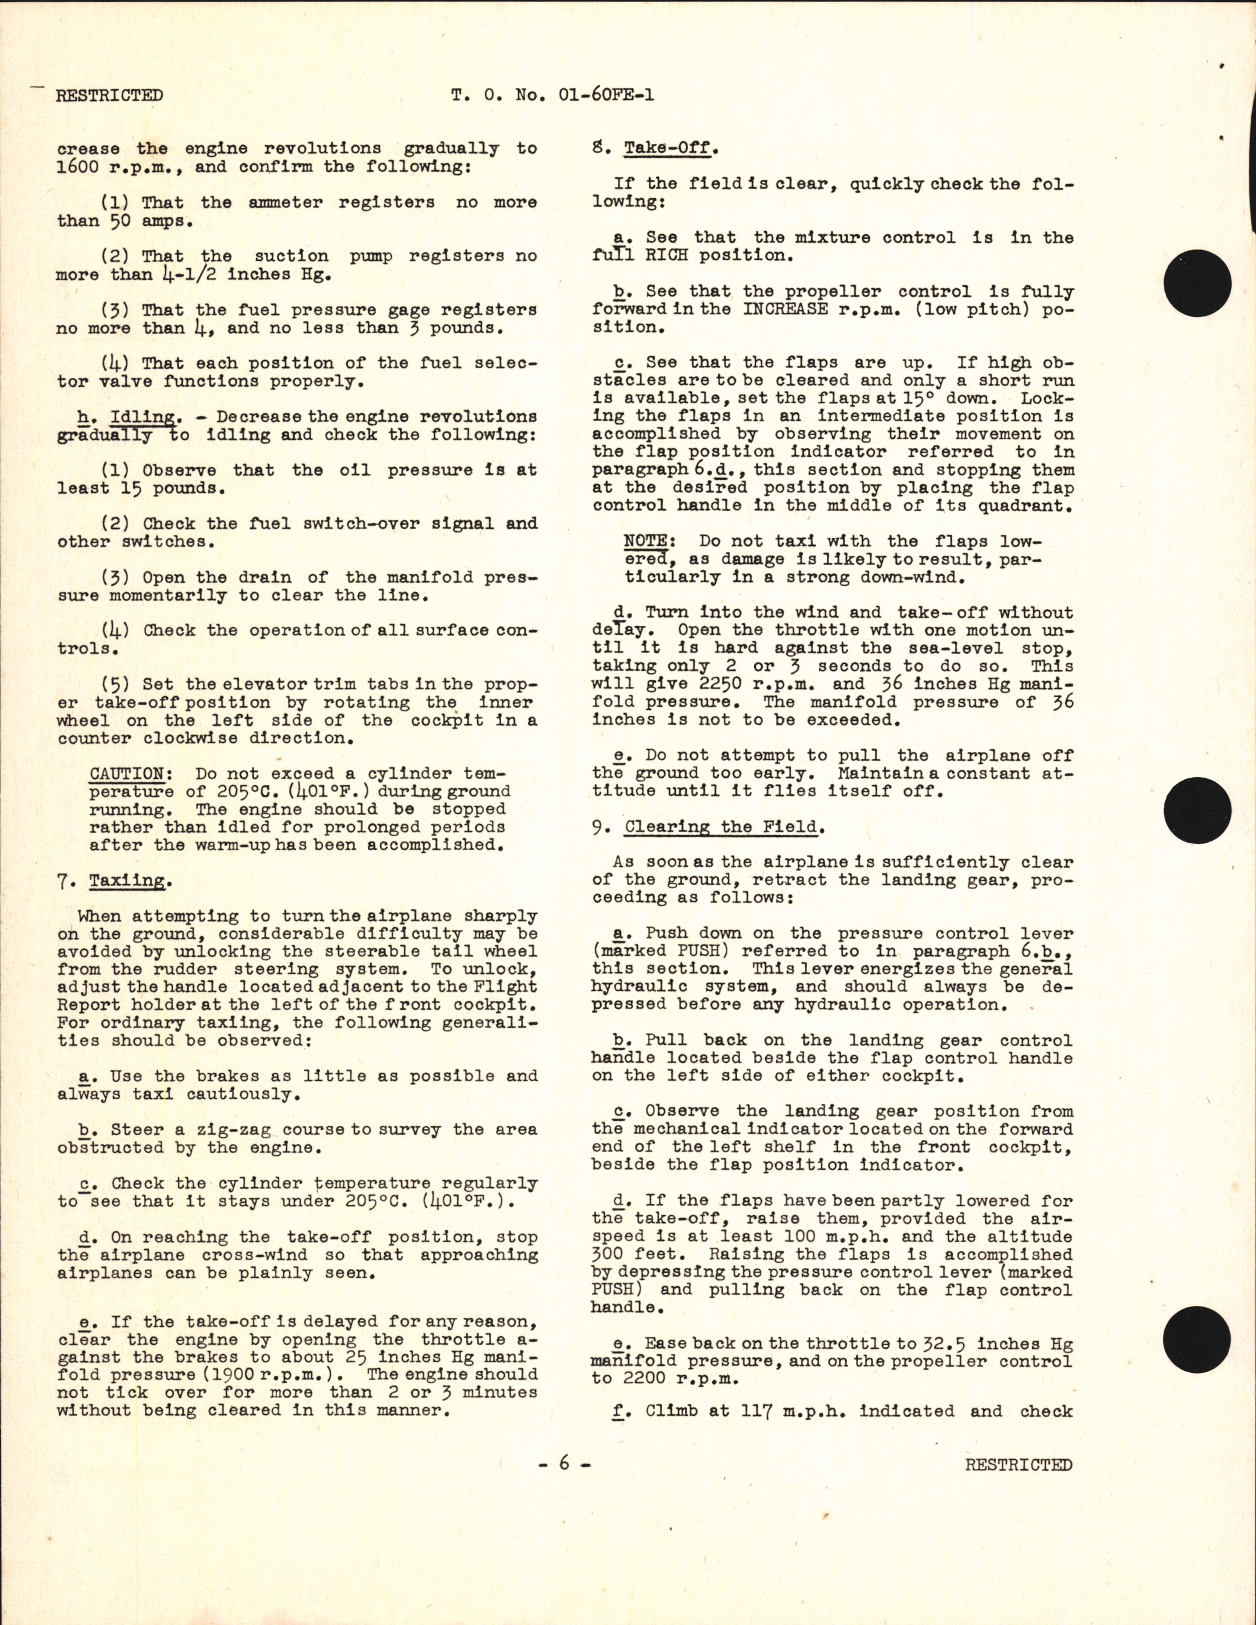 Sample page 8 from AirCorps Library document: Operation and Flight Instructions for AT-6C and SNJ-4 Training Airplanes